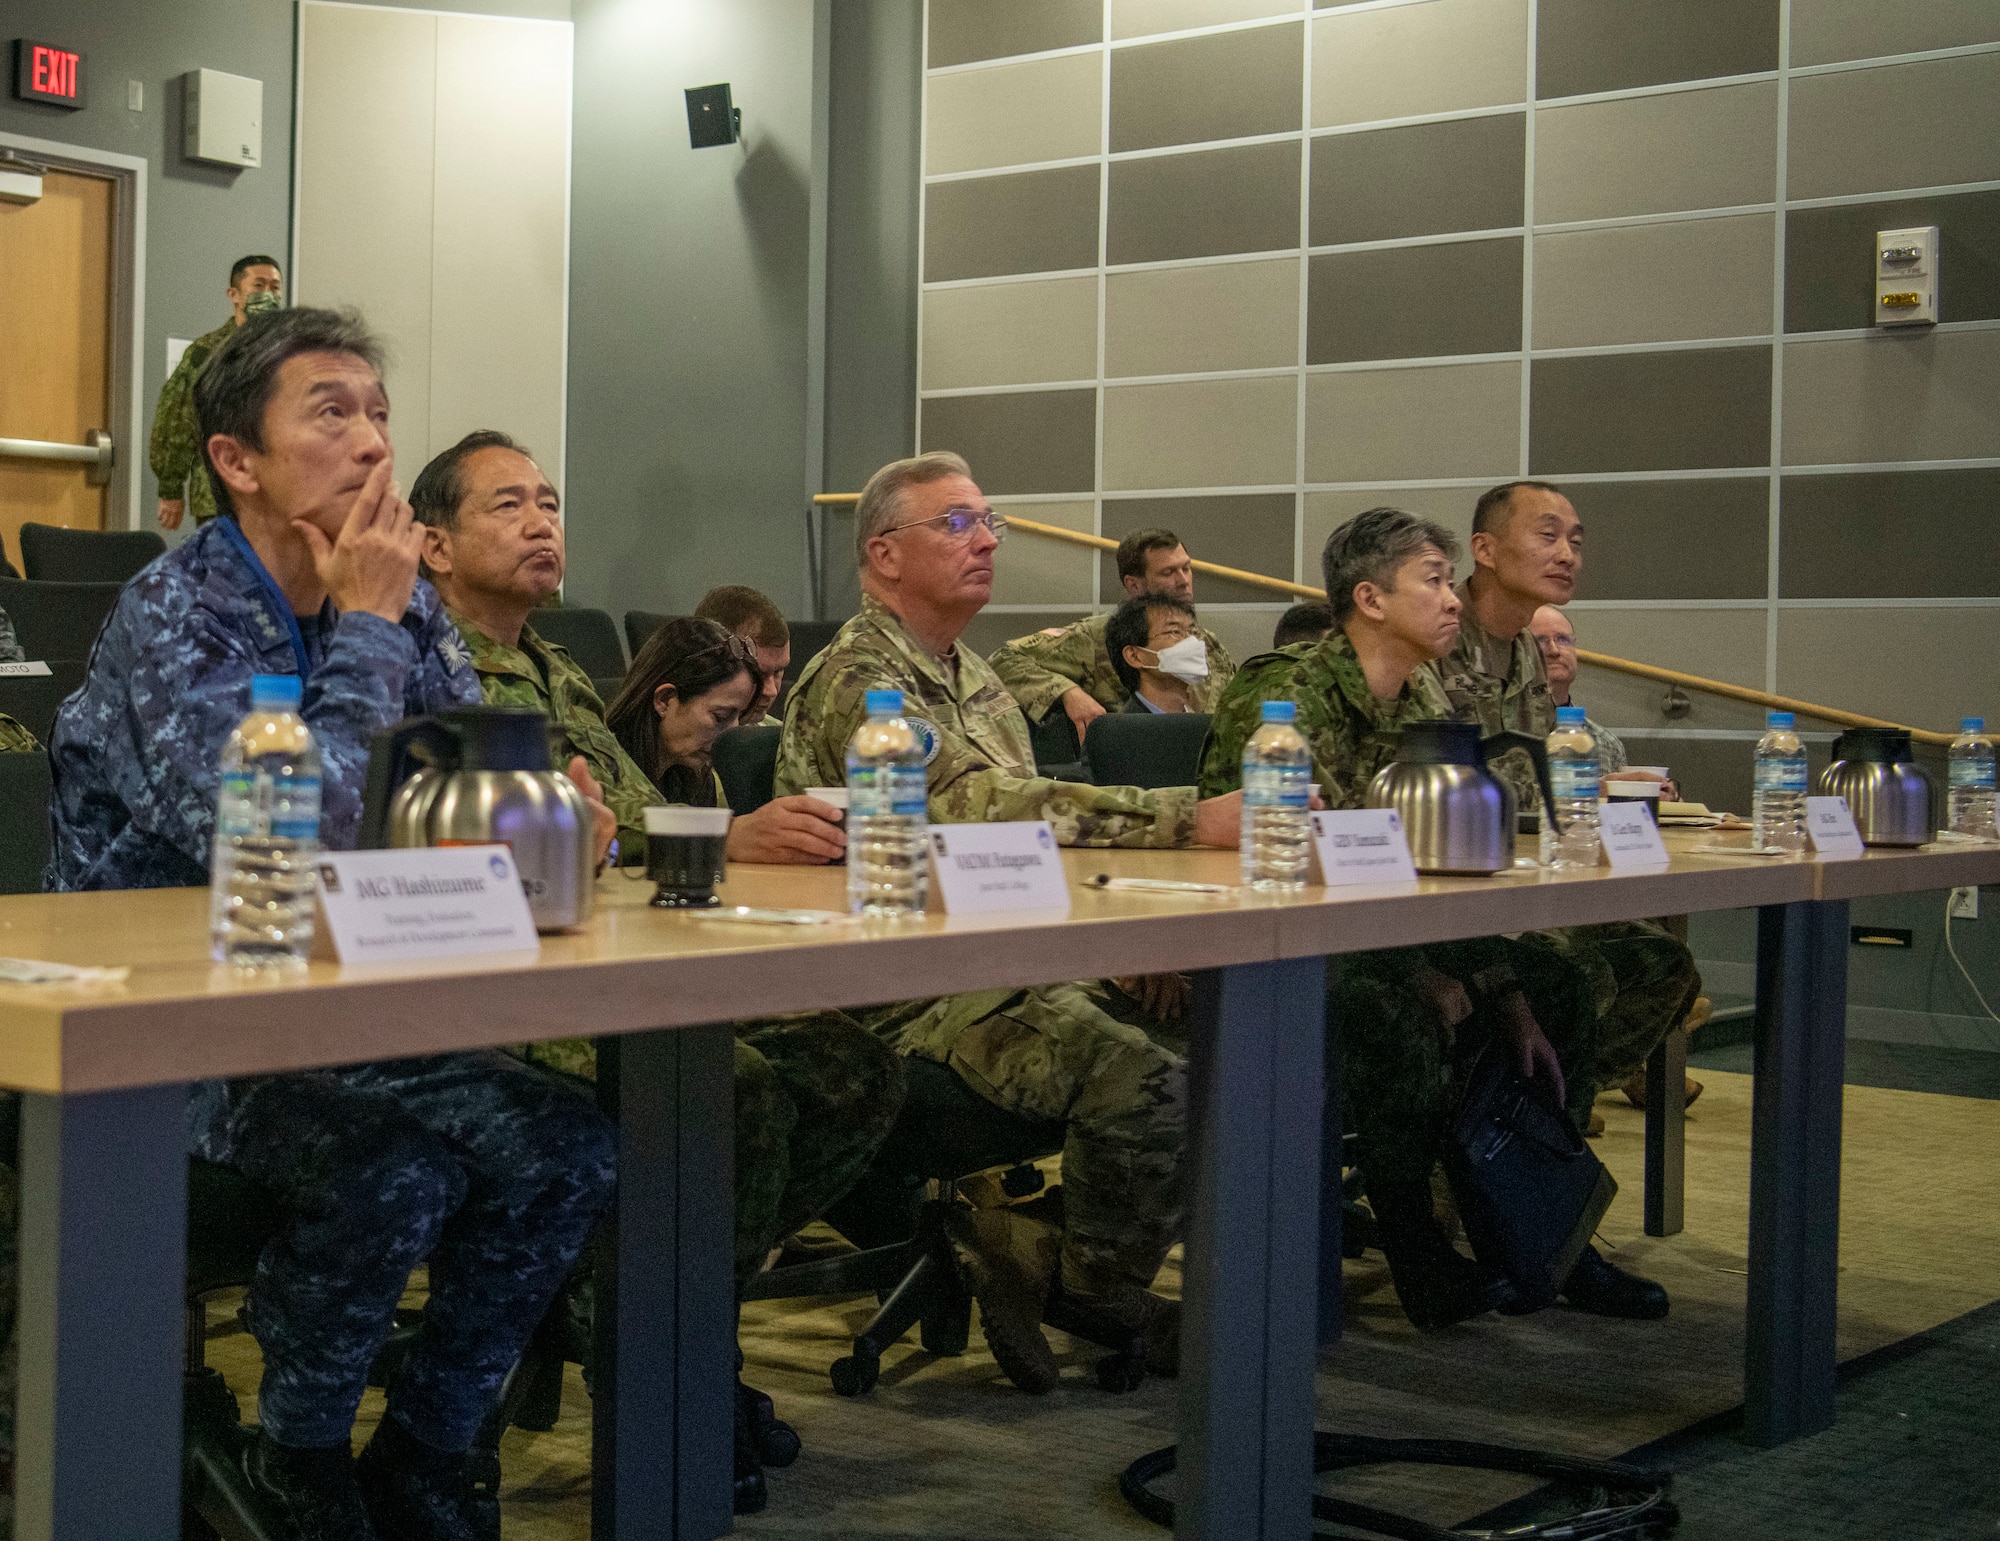 U.S. Air Force Lt. Gen. Ricky Rupp, commander of United States Forces Japan and Fifth Air Force, sits with Japan Air and Ground Self-Defense Force leaders for a multi-domain operations brief during exercise Keen Sword 23 at Sagami Depot, Japan, Nov. 17, 2022.